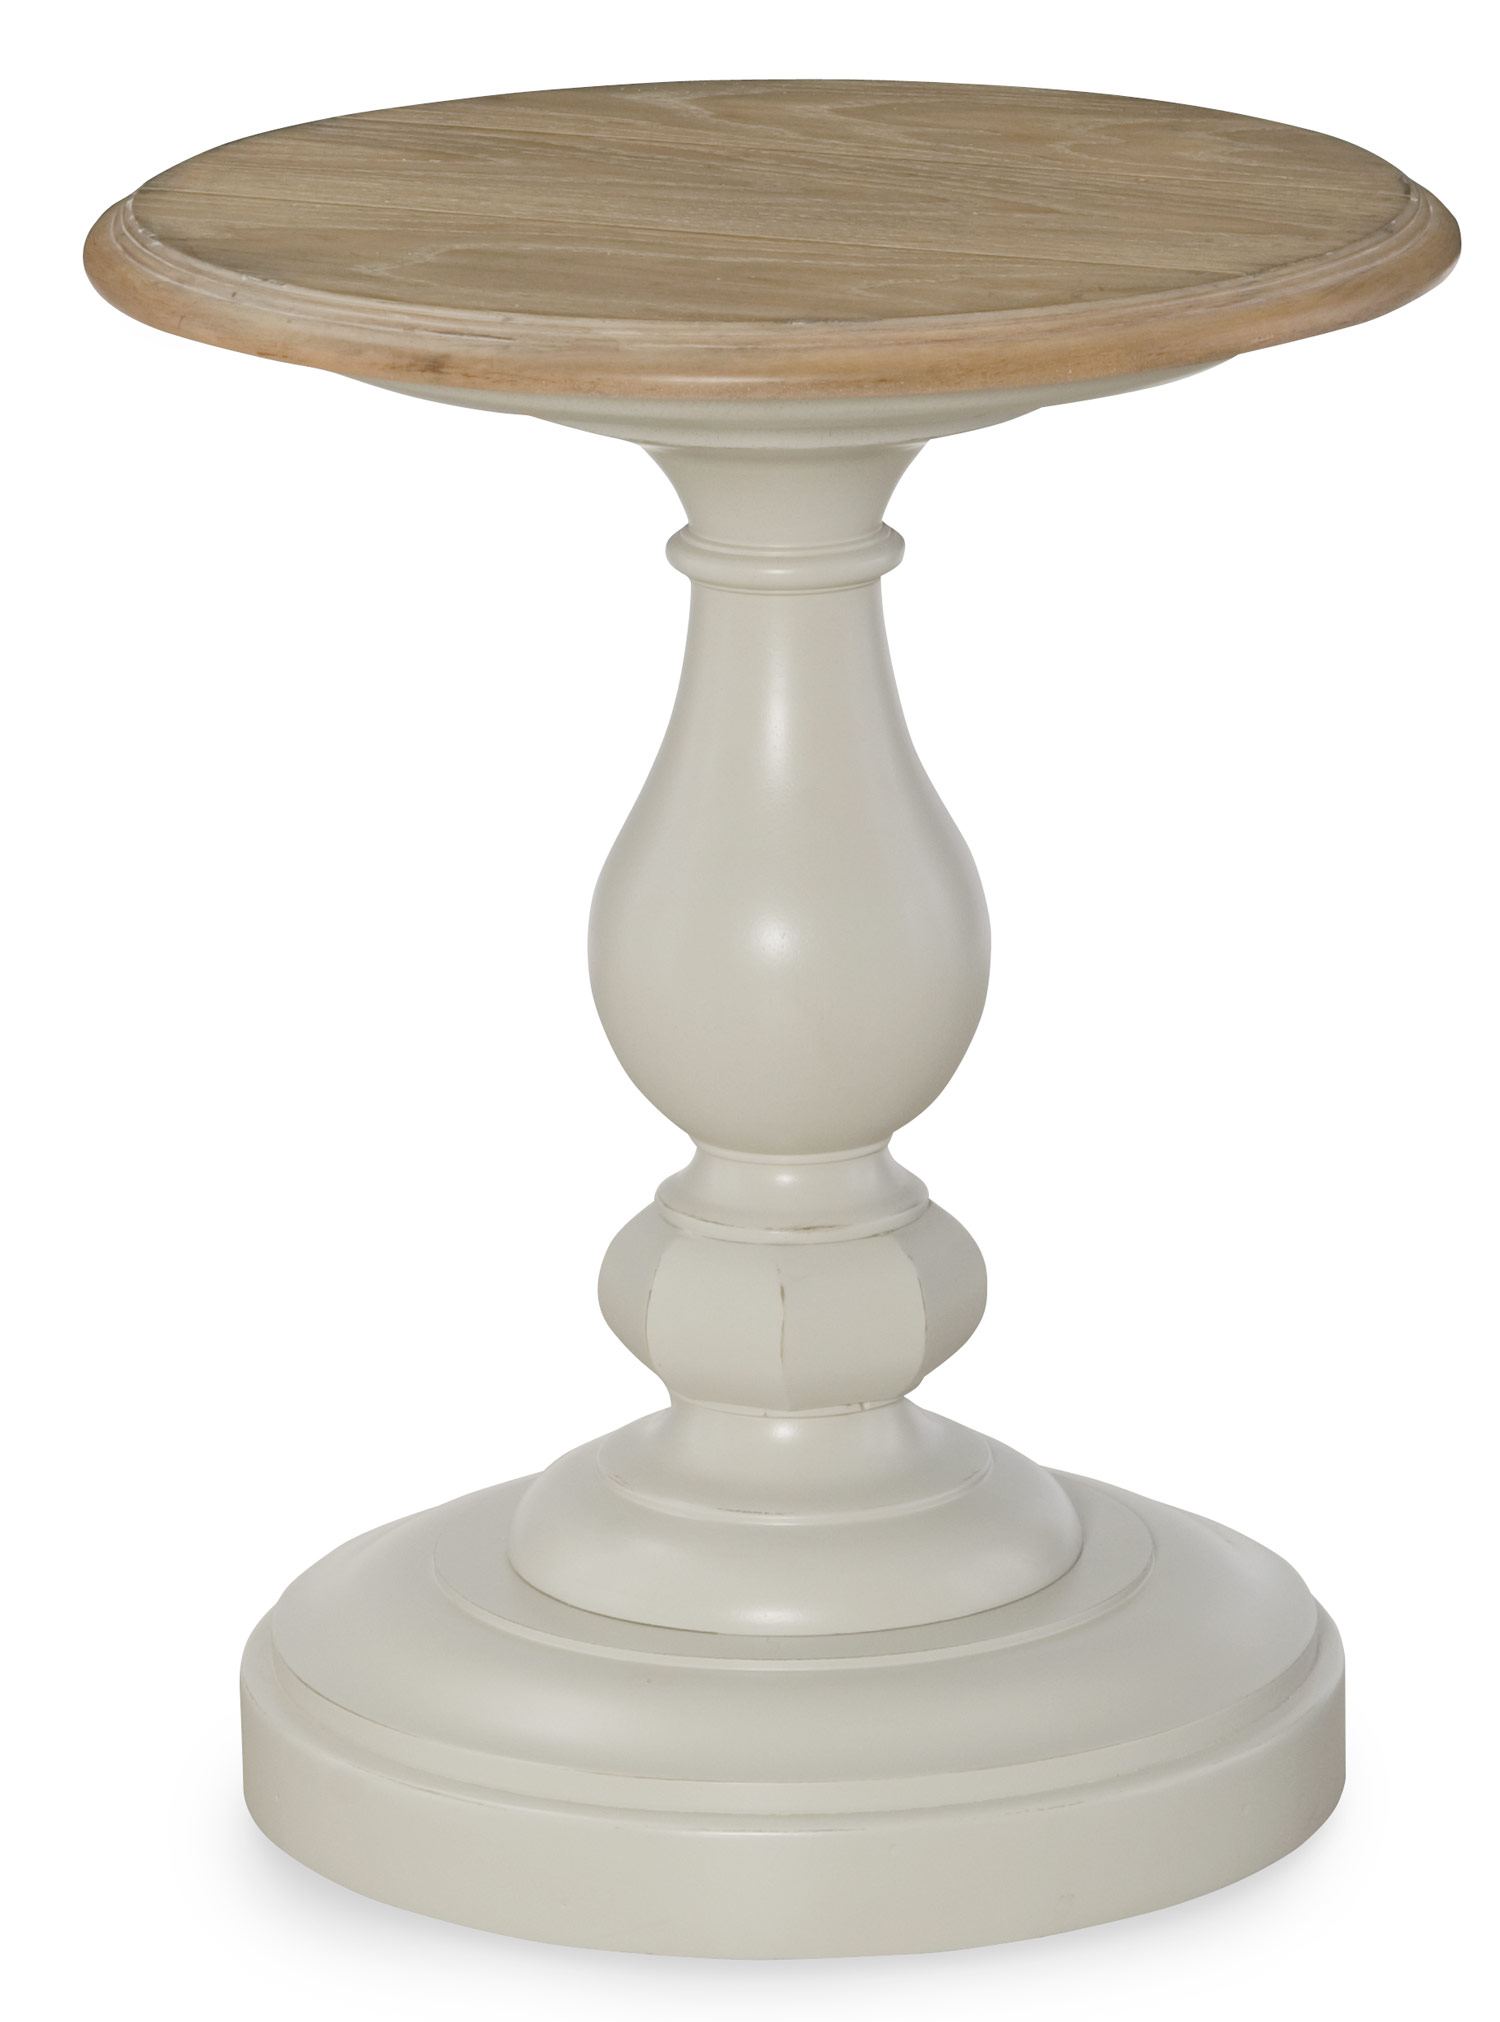 Legacy Classic Sanibel Round Chairside Table - Driftwood/Mist Paint